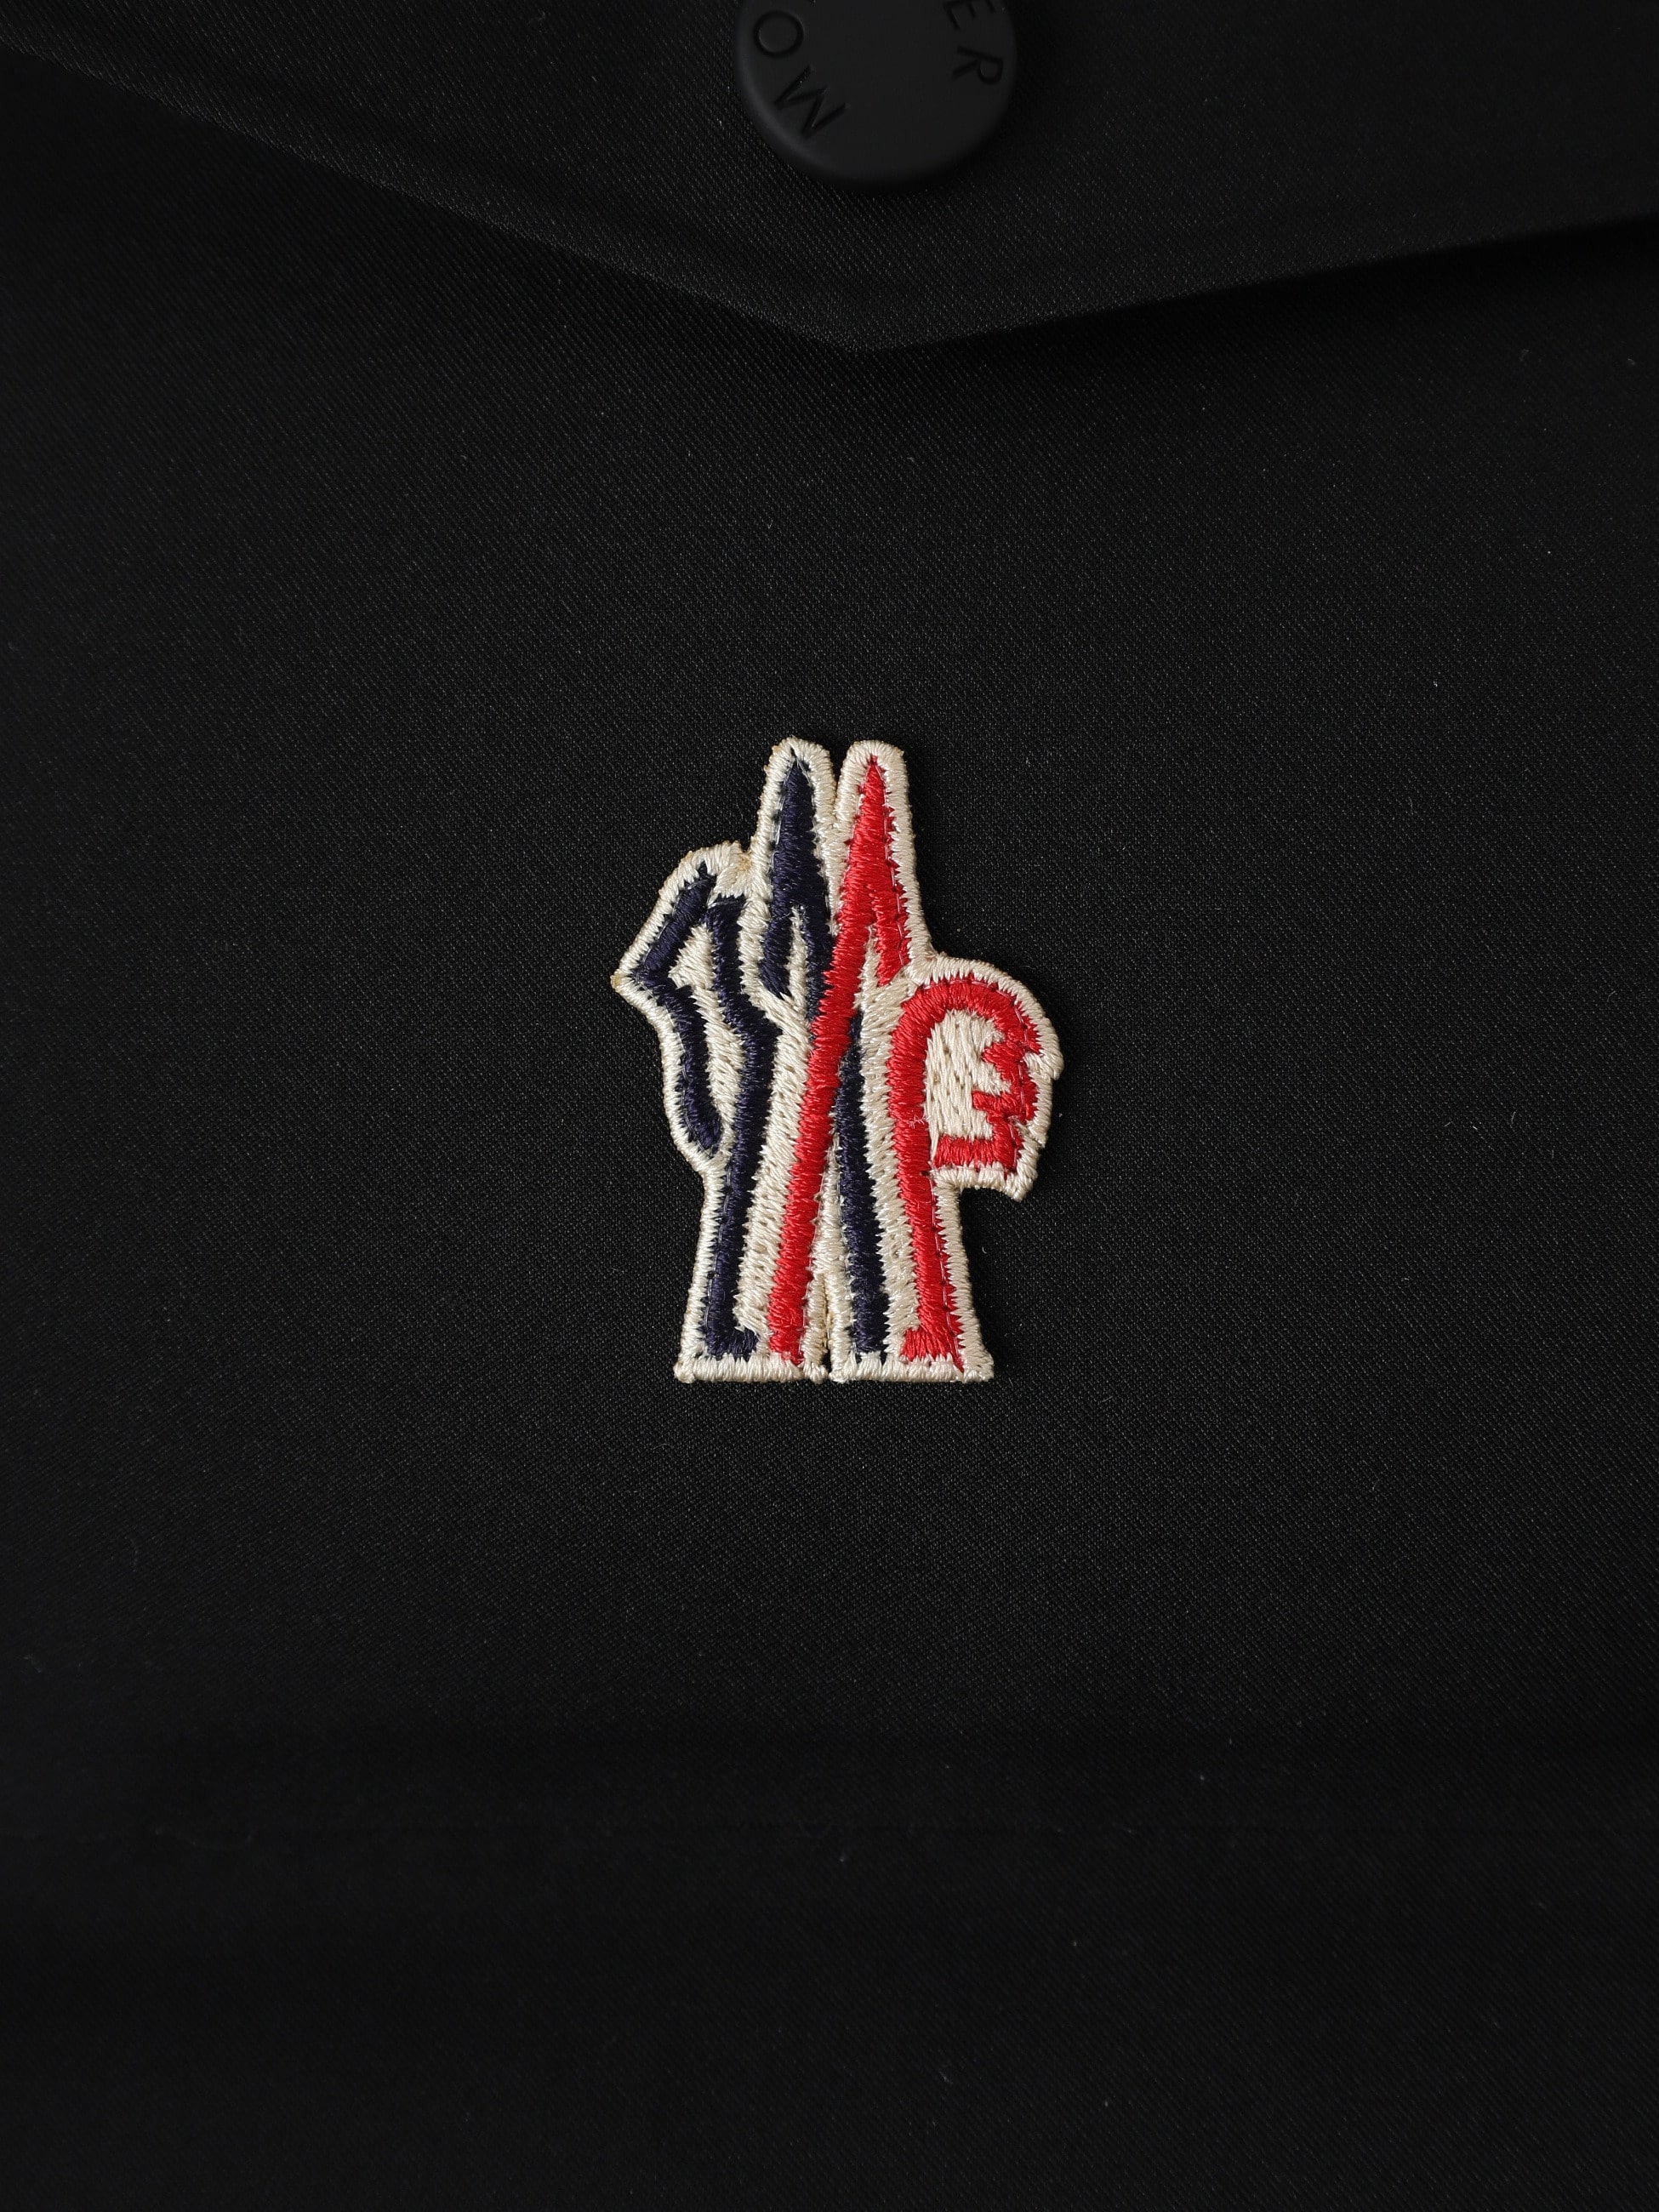 Montgetech Jacket｜MONCLER GRENOBLE(モンクレール